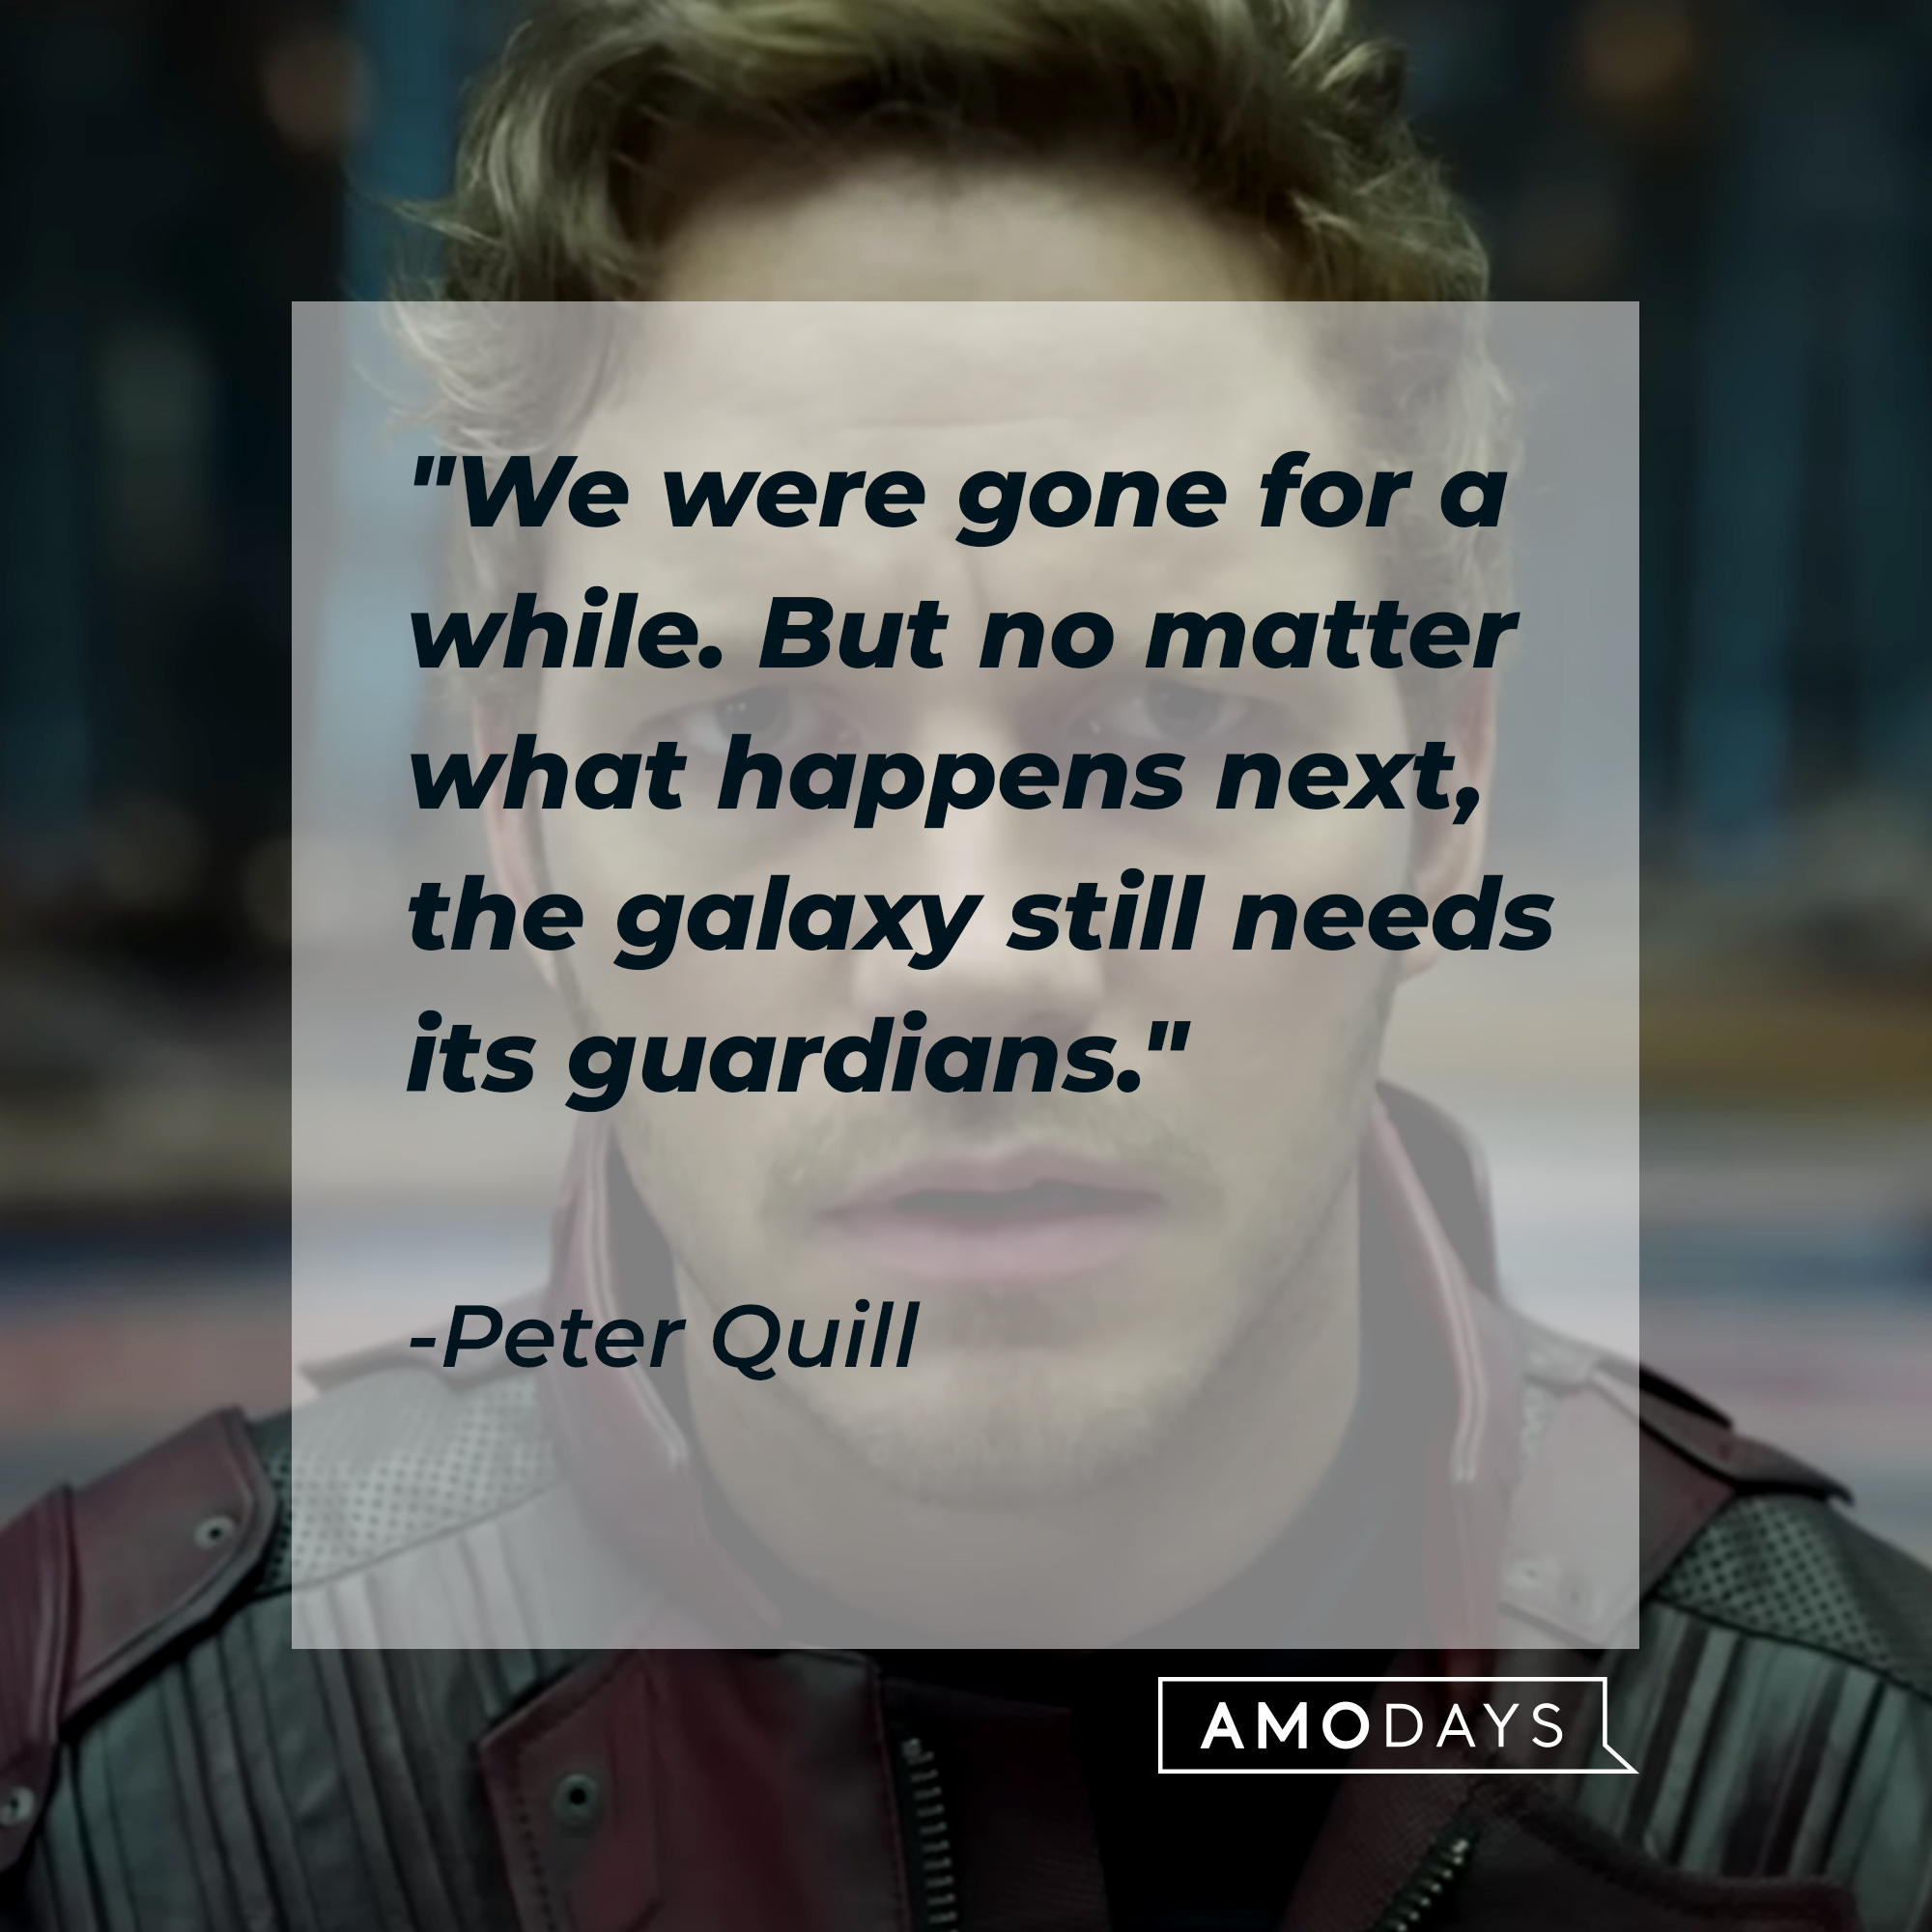 Peter Quill's quote, "We were gone for a while. But no matter what happens next, the galaxy still needs its guardians." | Image: youtube.com/marvel